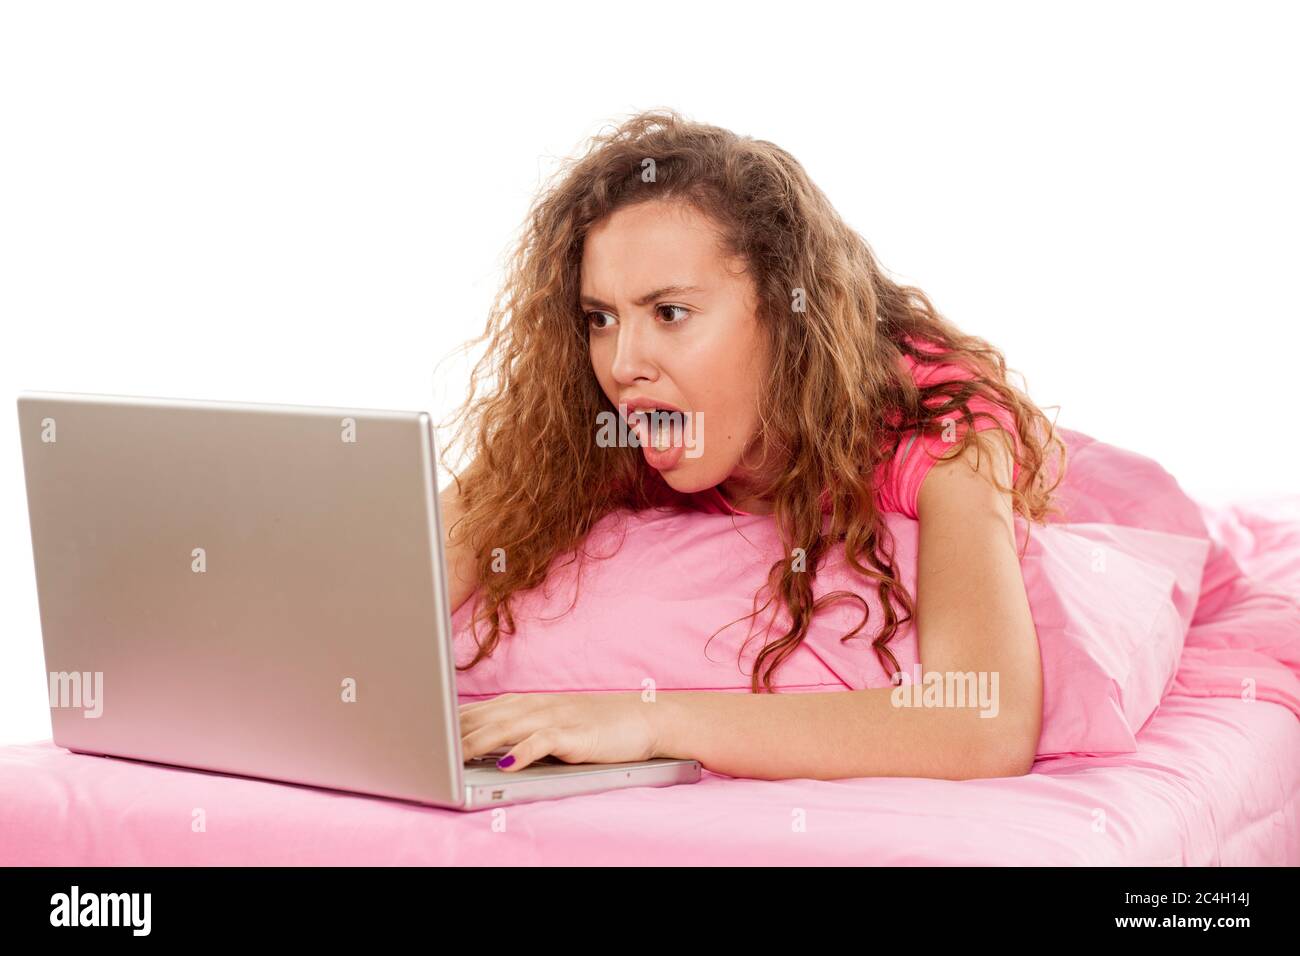 shocked girl looking at her laptop Stock Photo